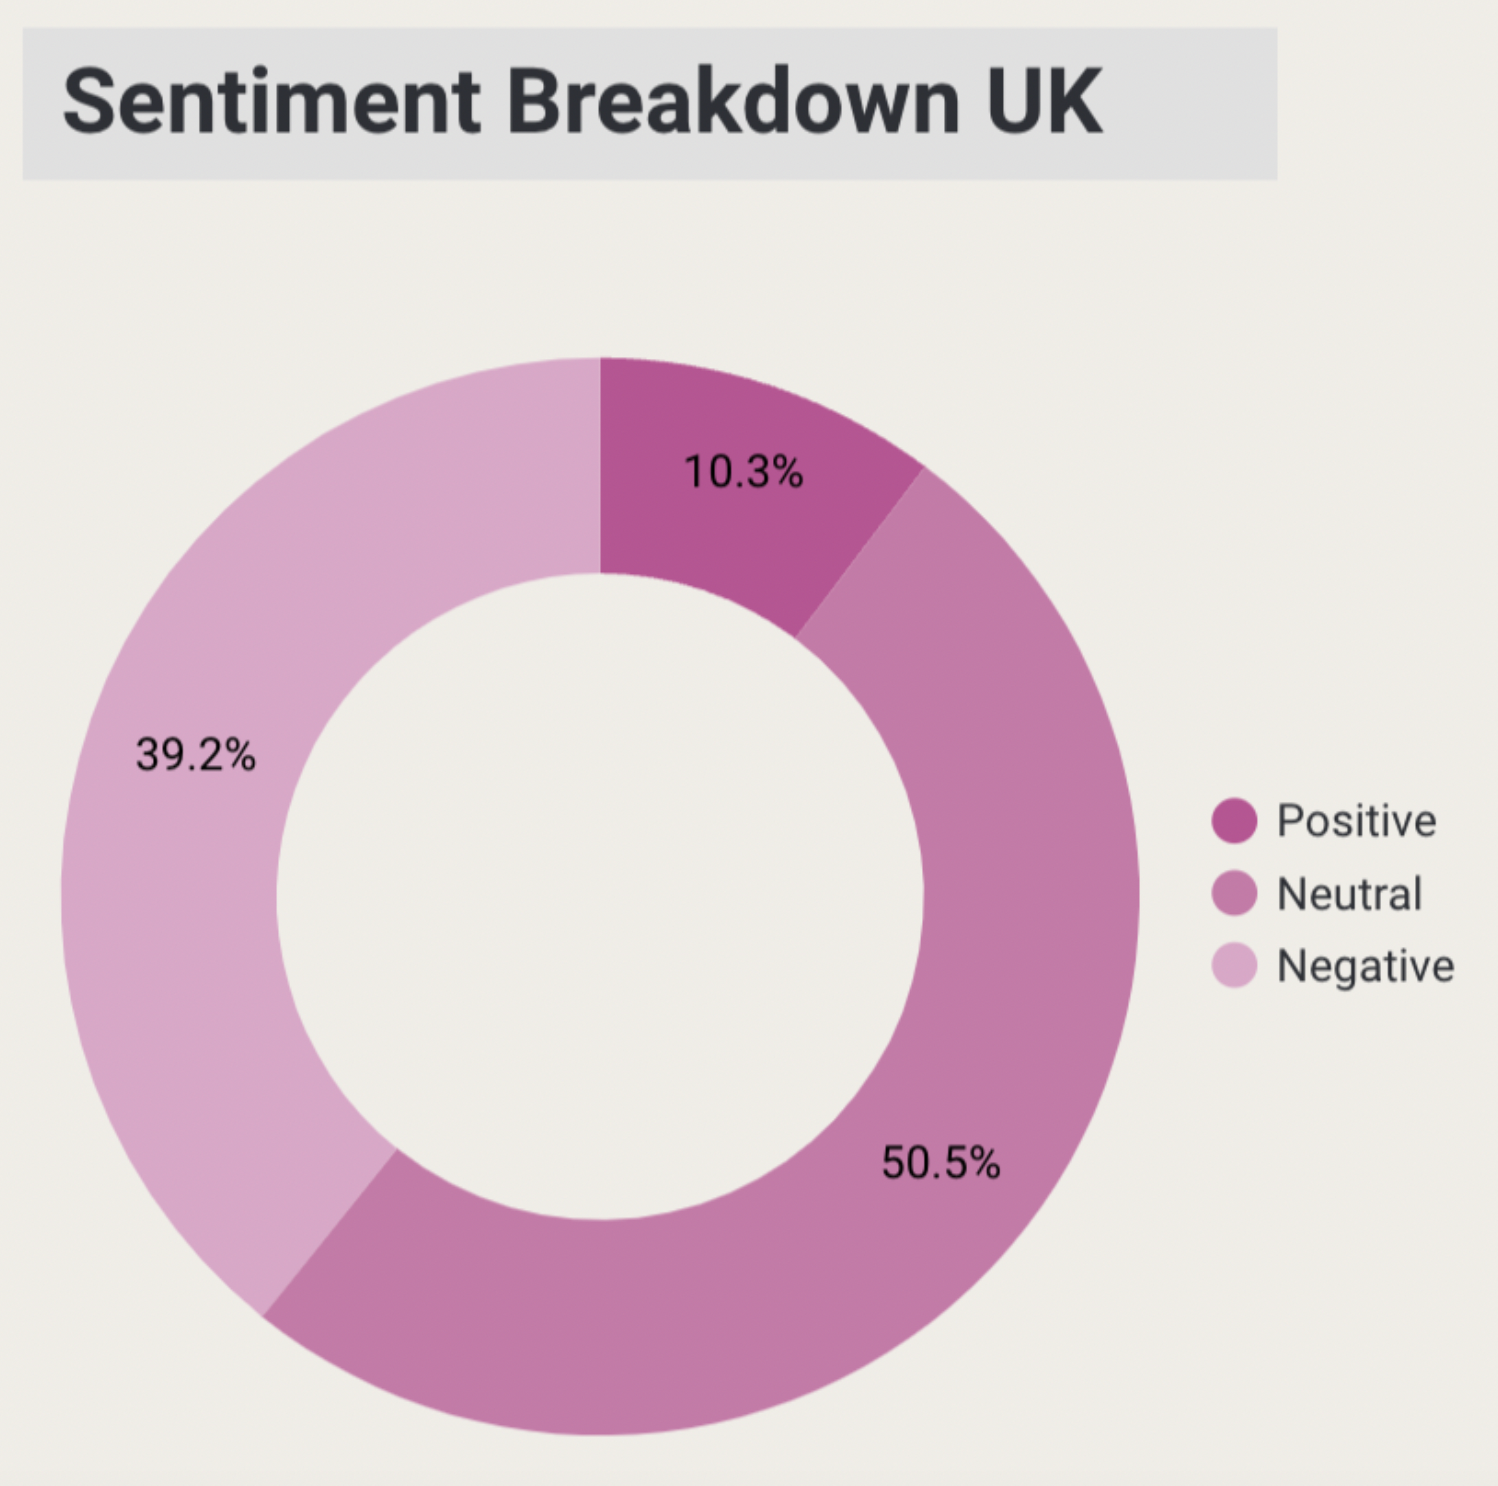 Figure 6: The percentage breakdown of positive, negative and neutral sentiment in the UK.